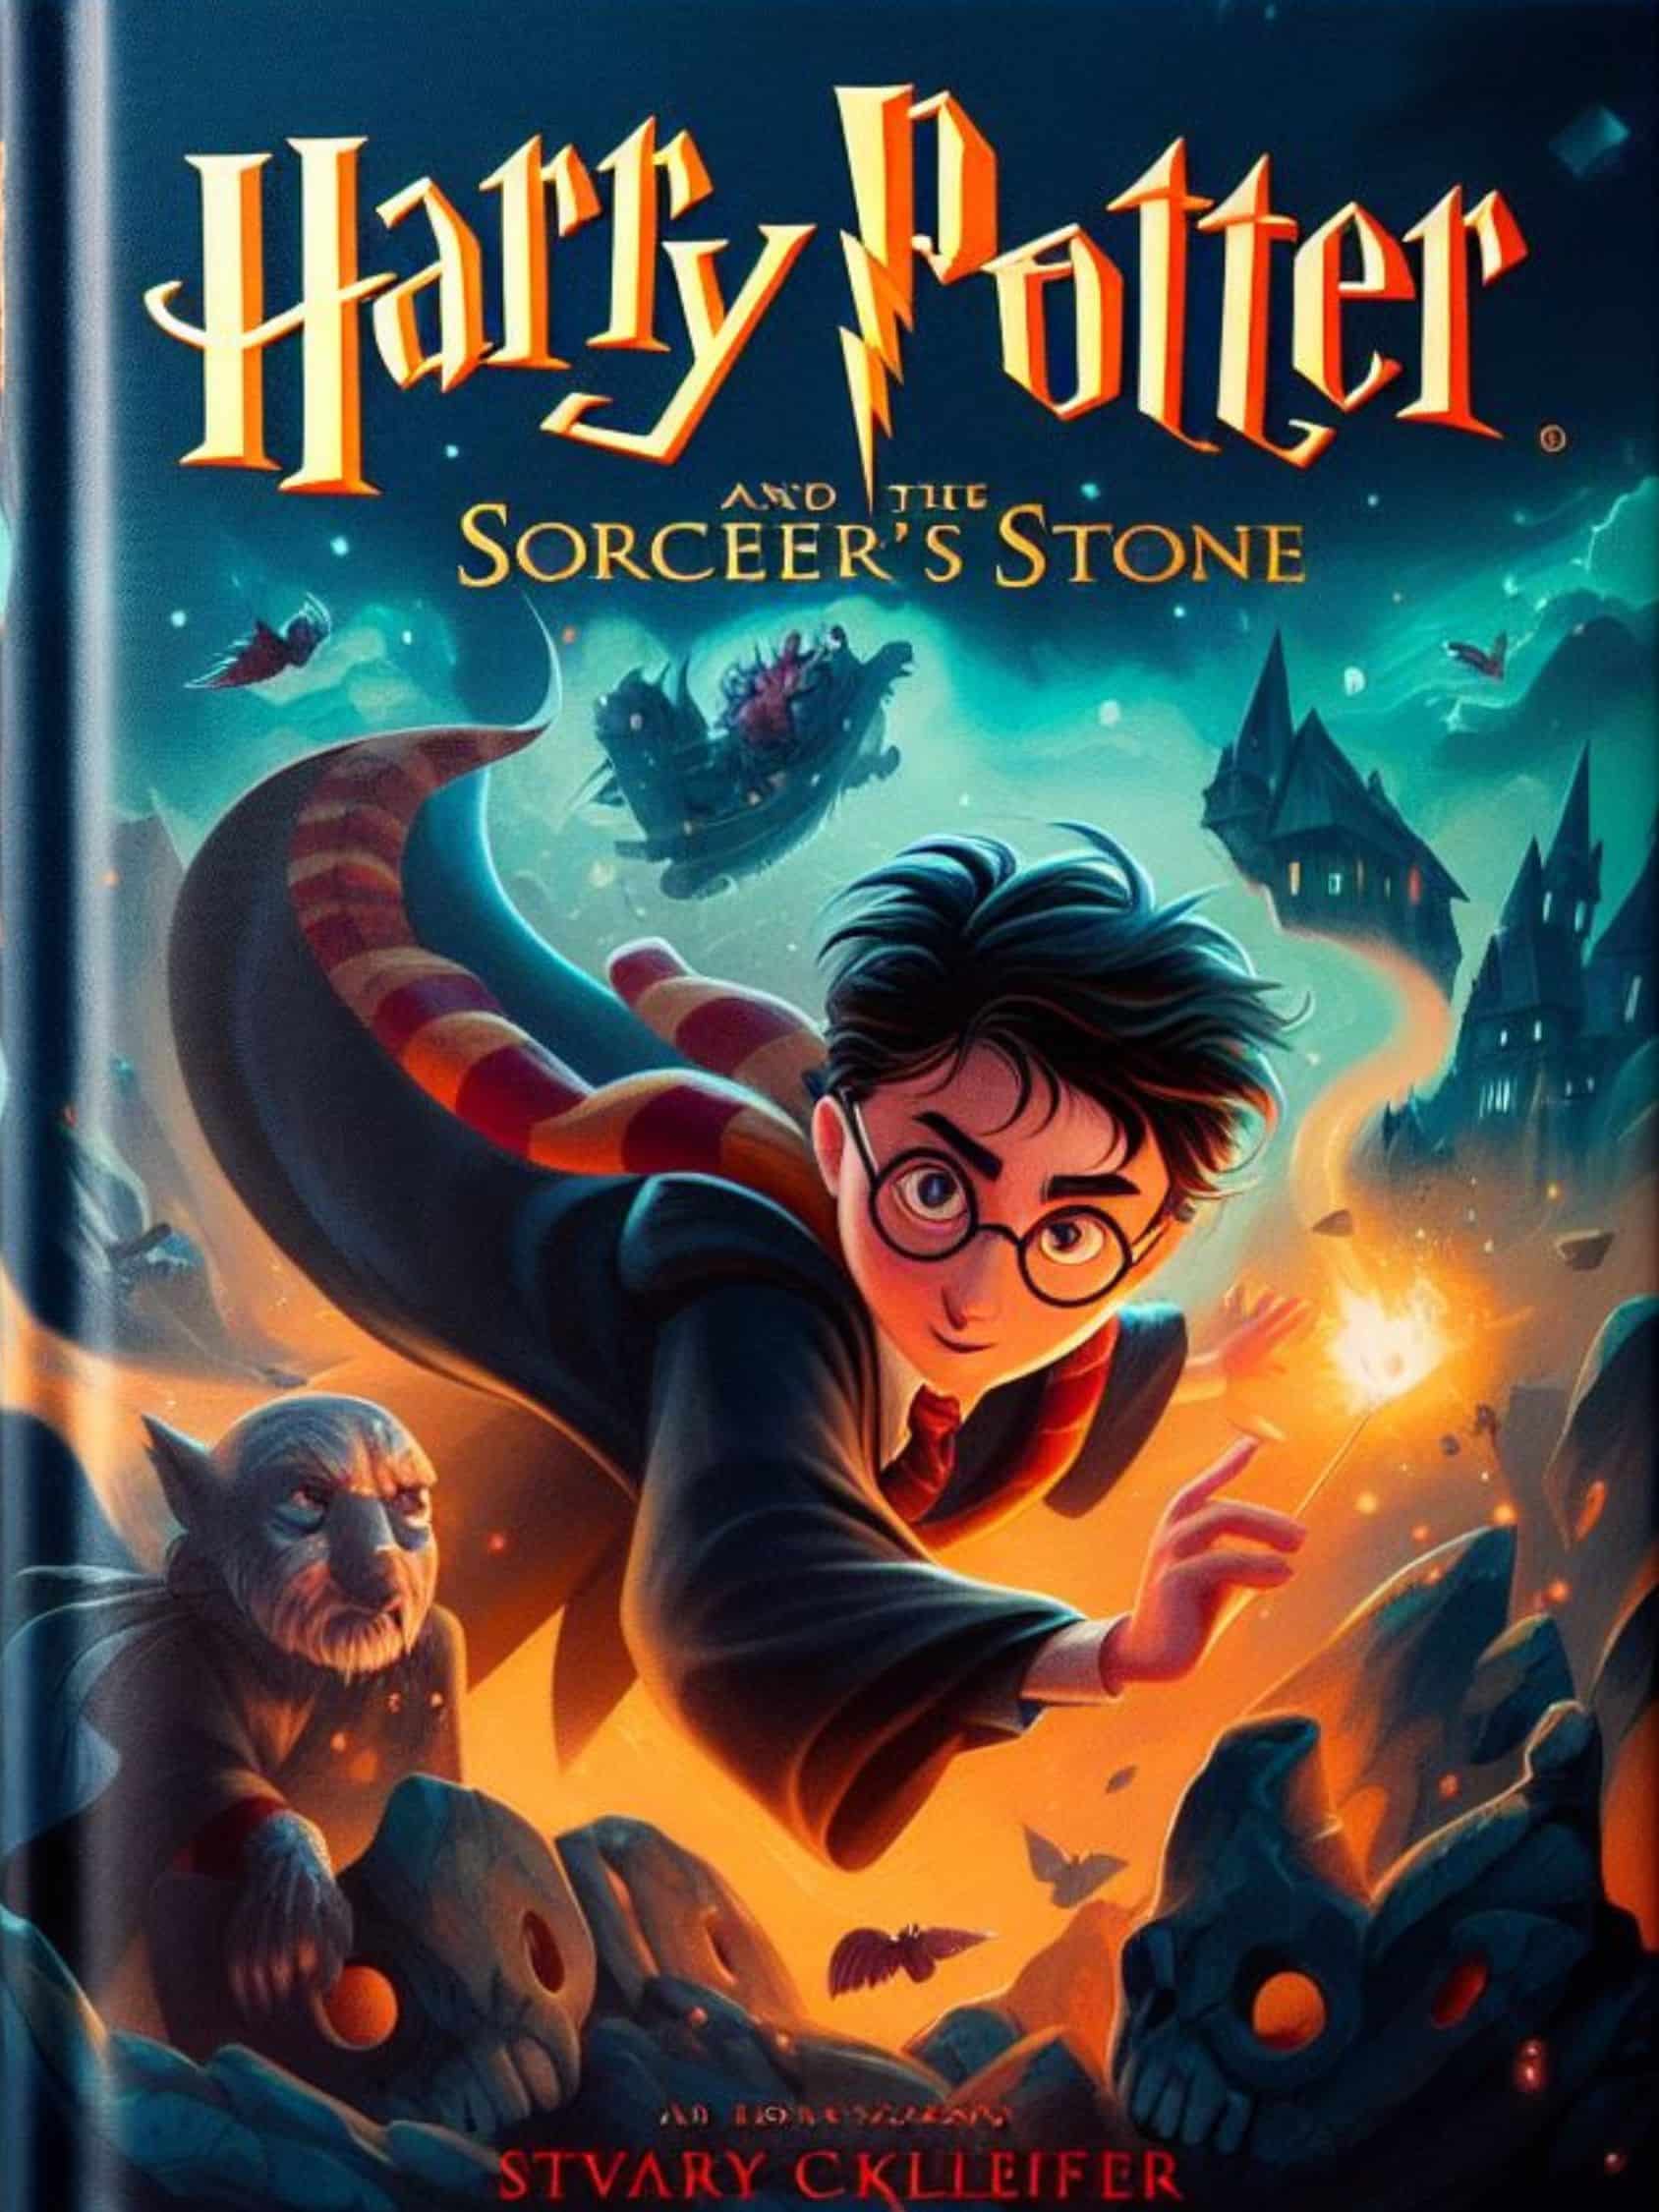 Harry Potter And The Sorcerer's Stone Audiobook Free